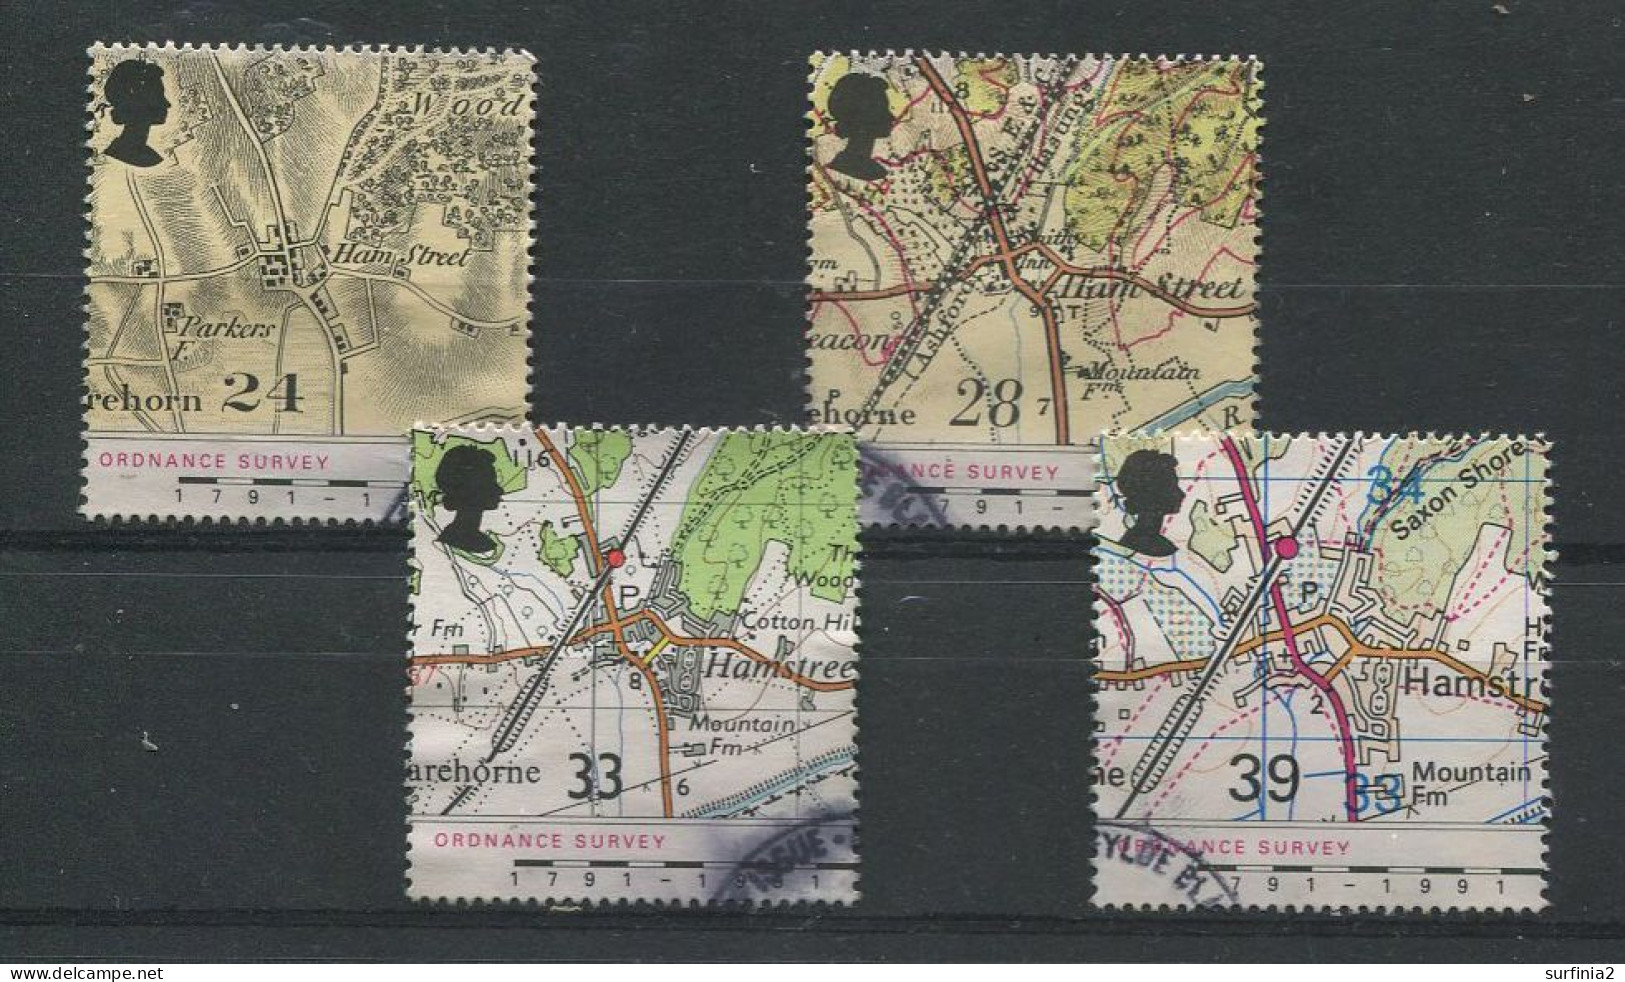 STAMPS - 1991 MAPS SET VFU - Used Stamps